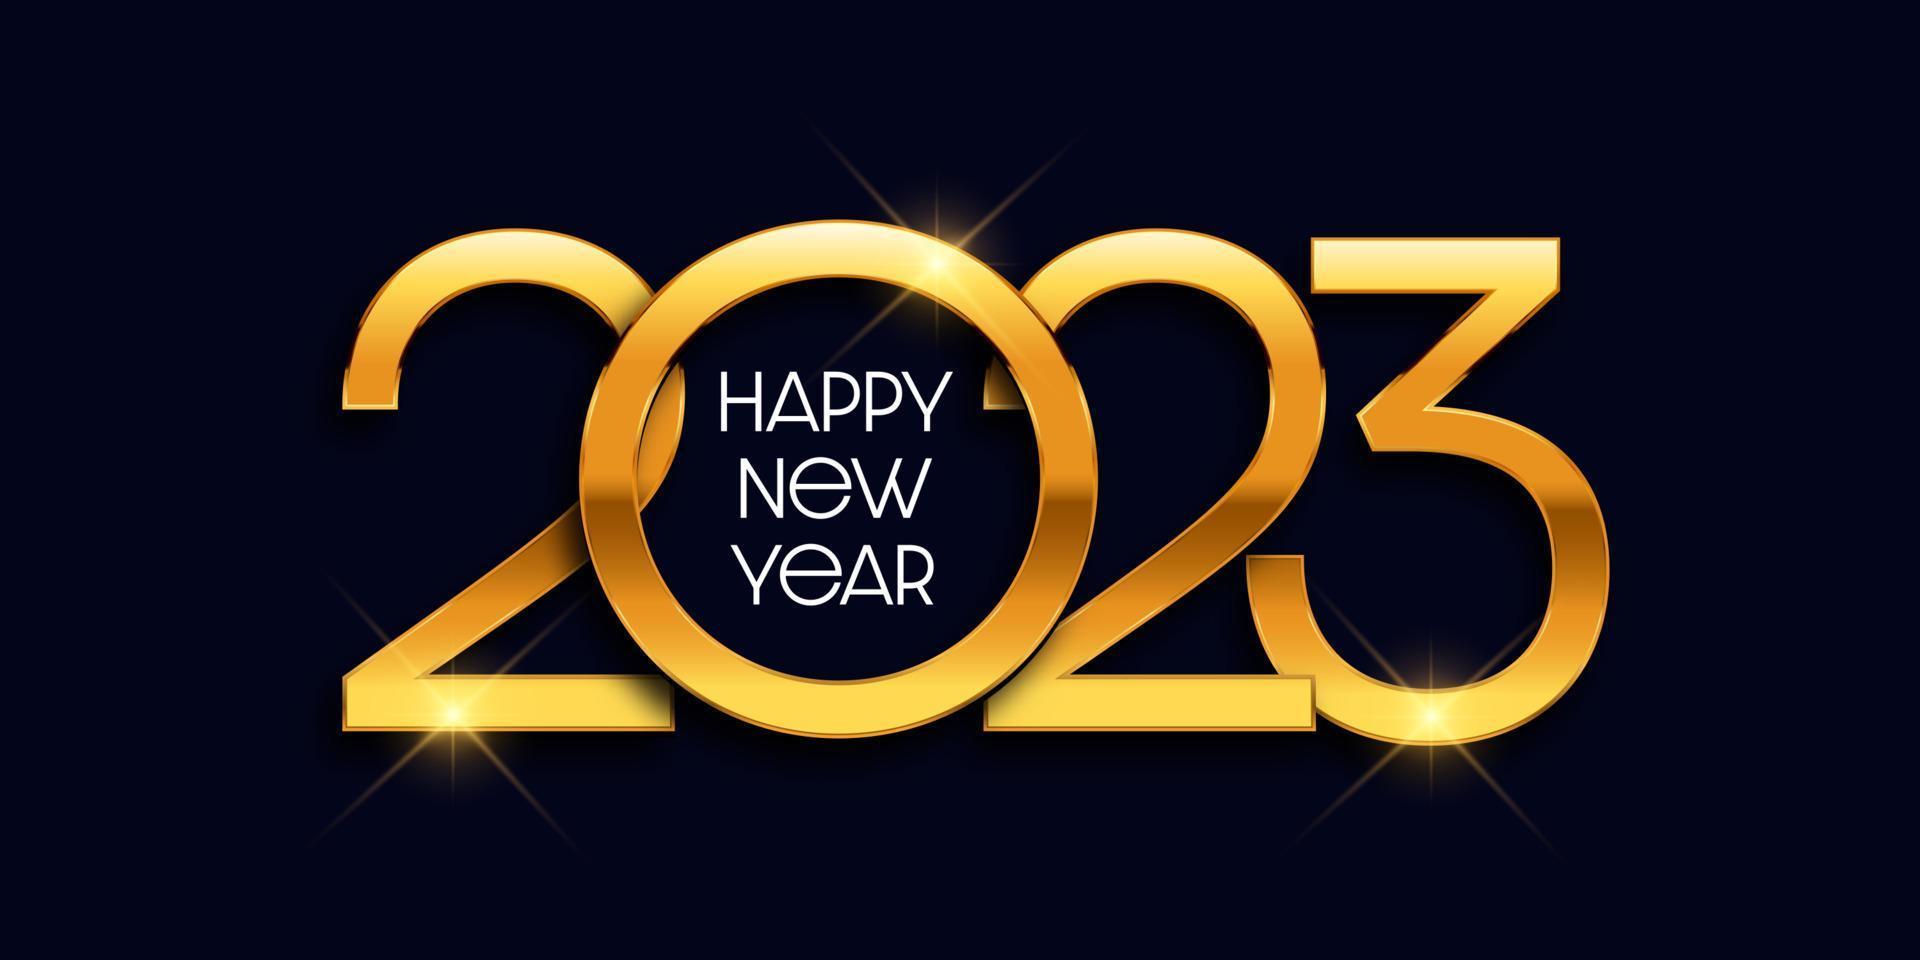 Happy new year banner with metallic gold numbers design vector